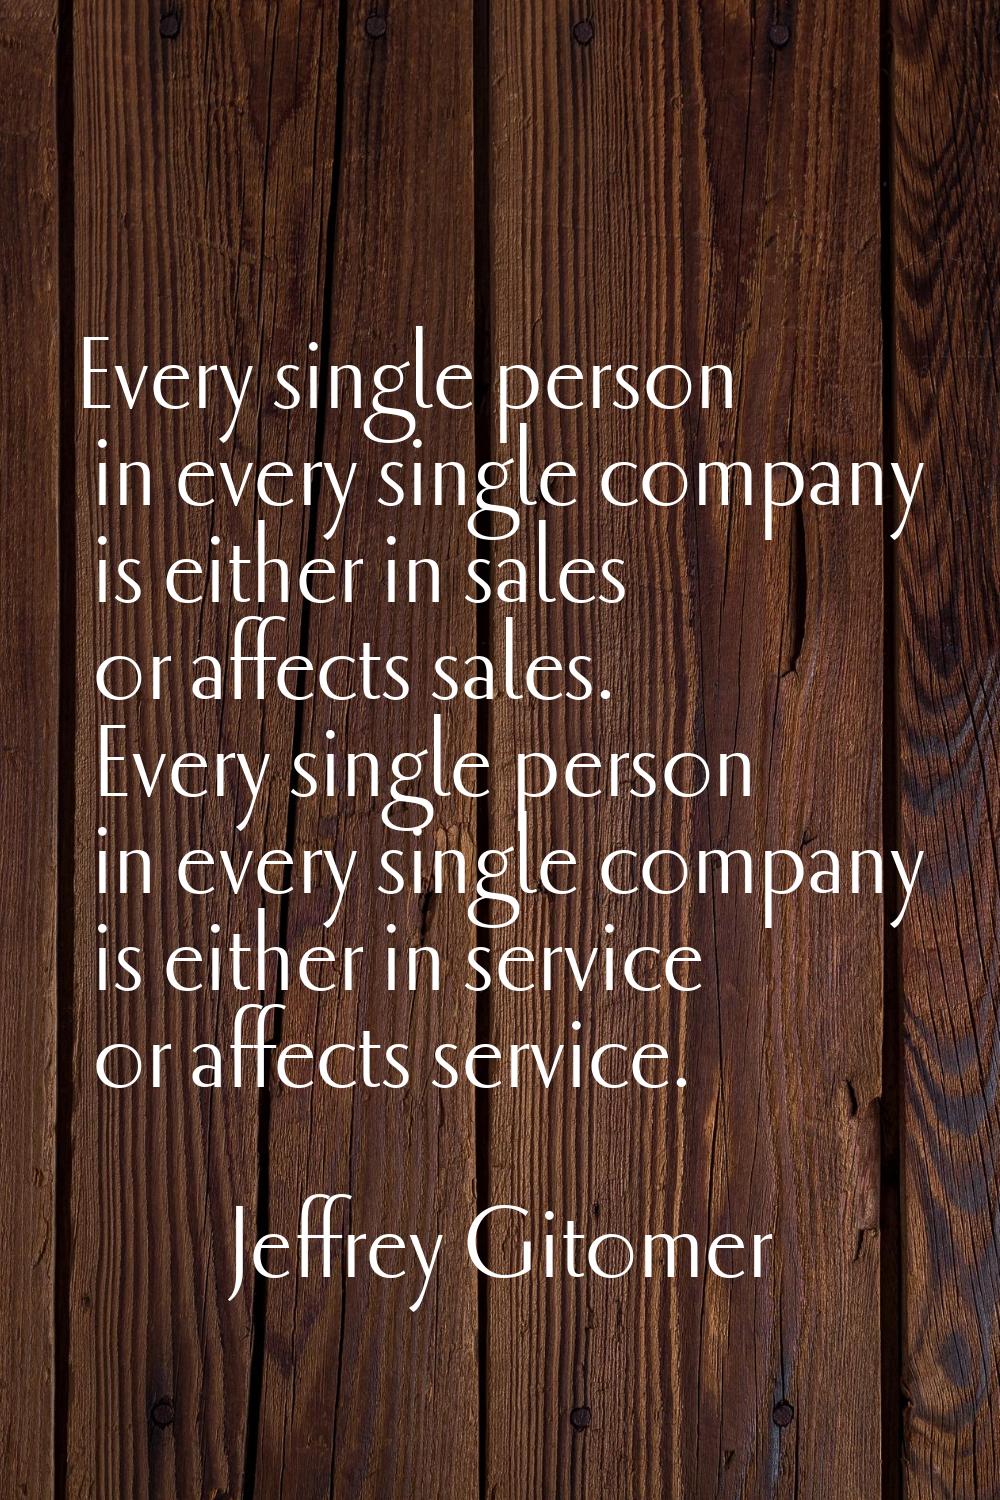 Every single person in every single company is either in sales or affects sales. Every single perso